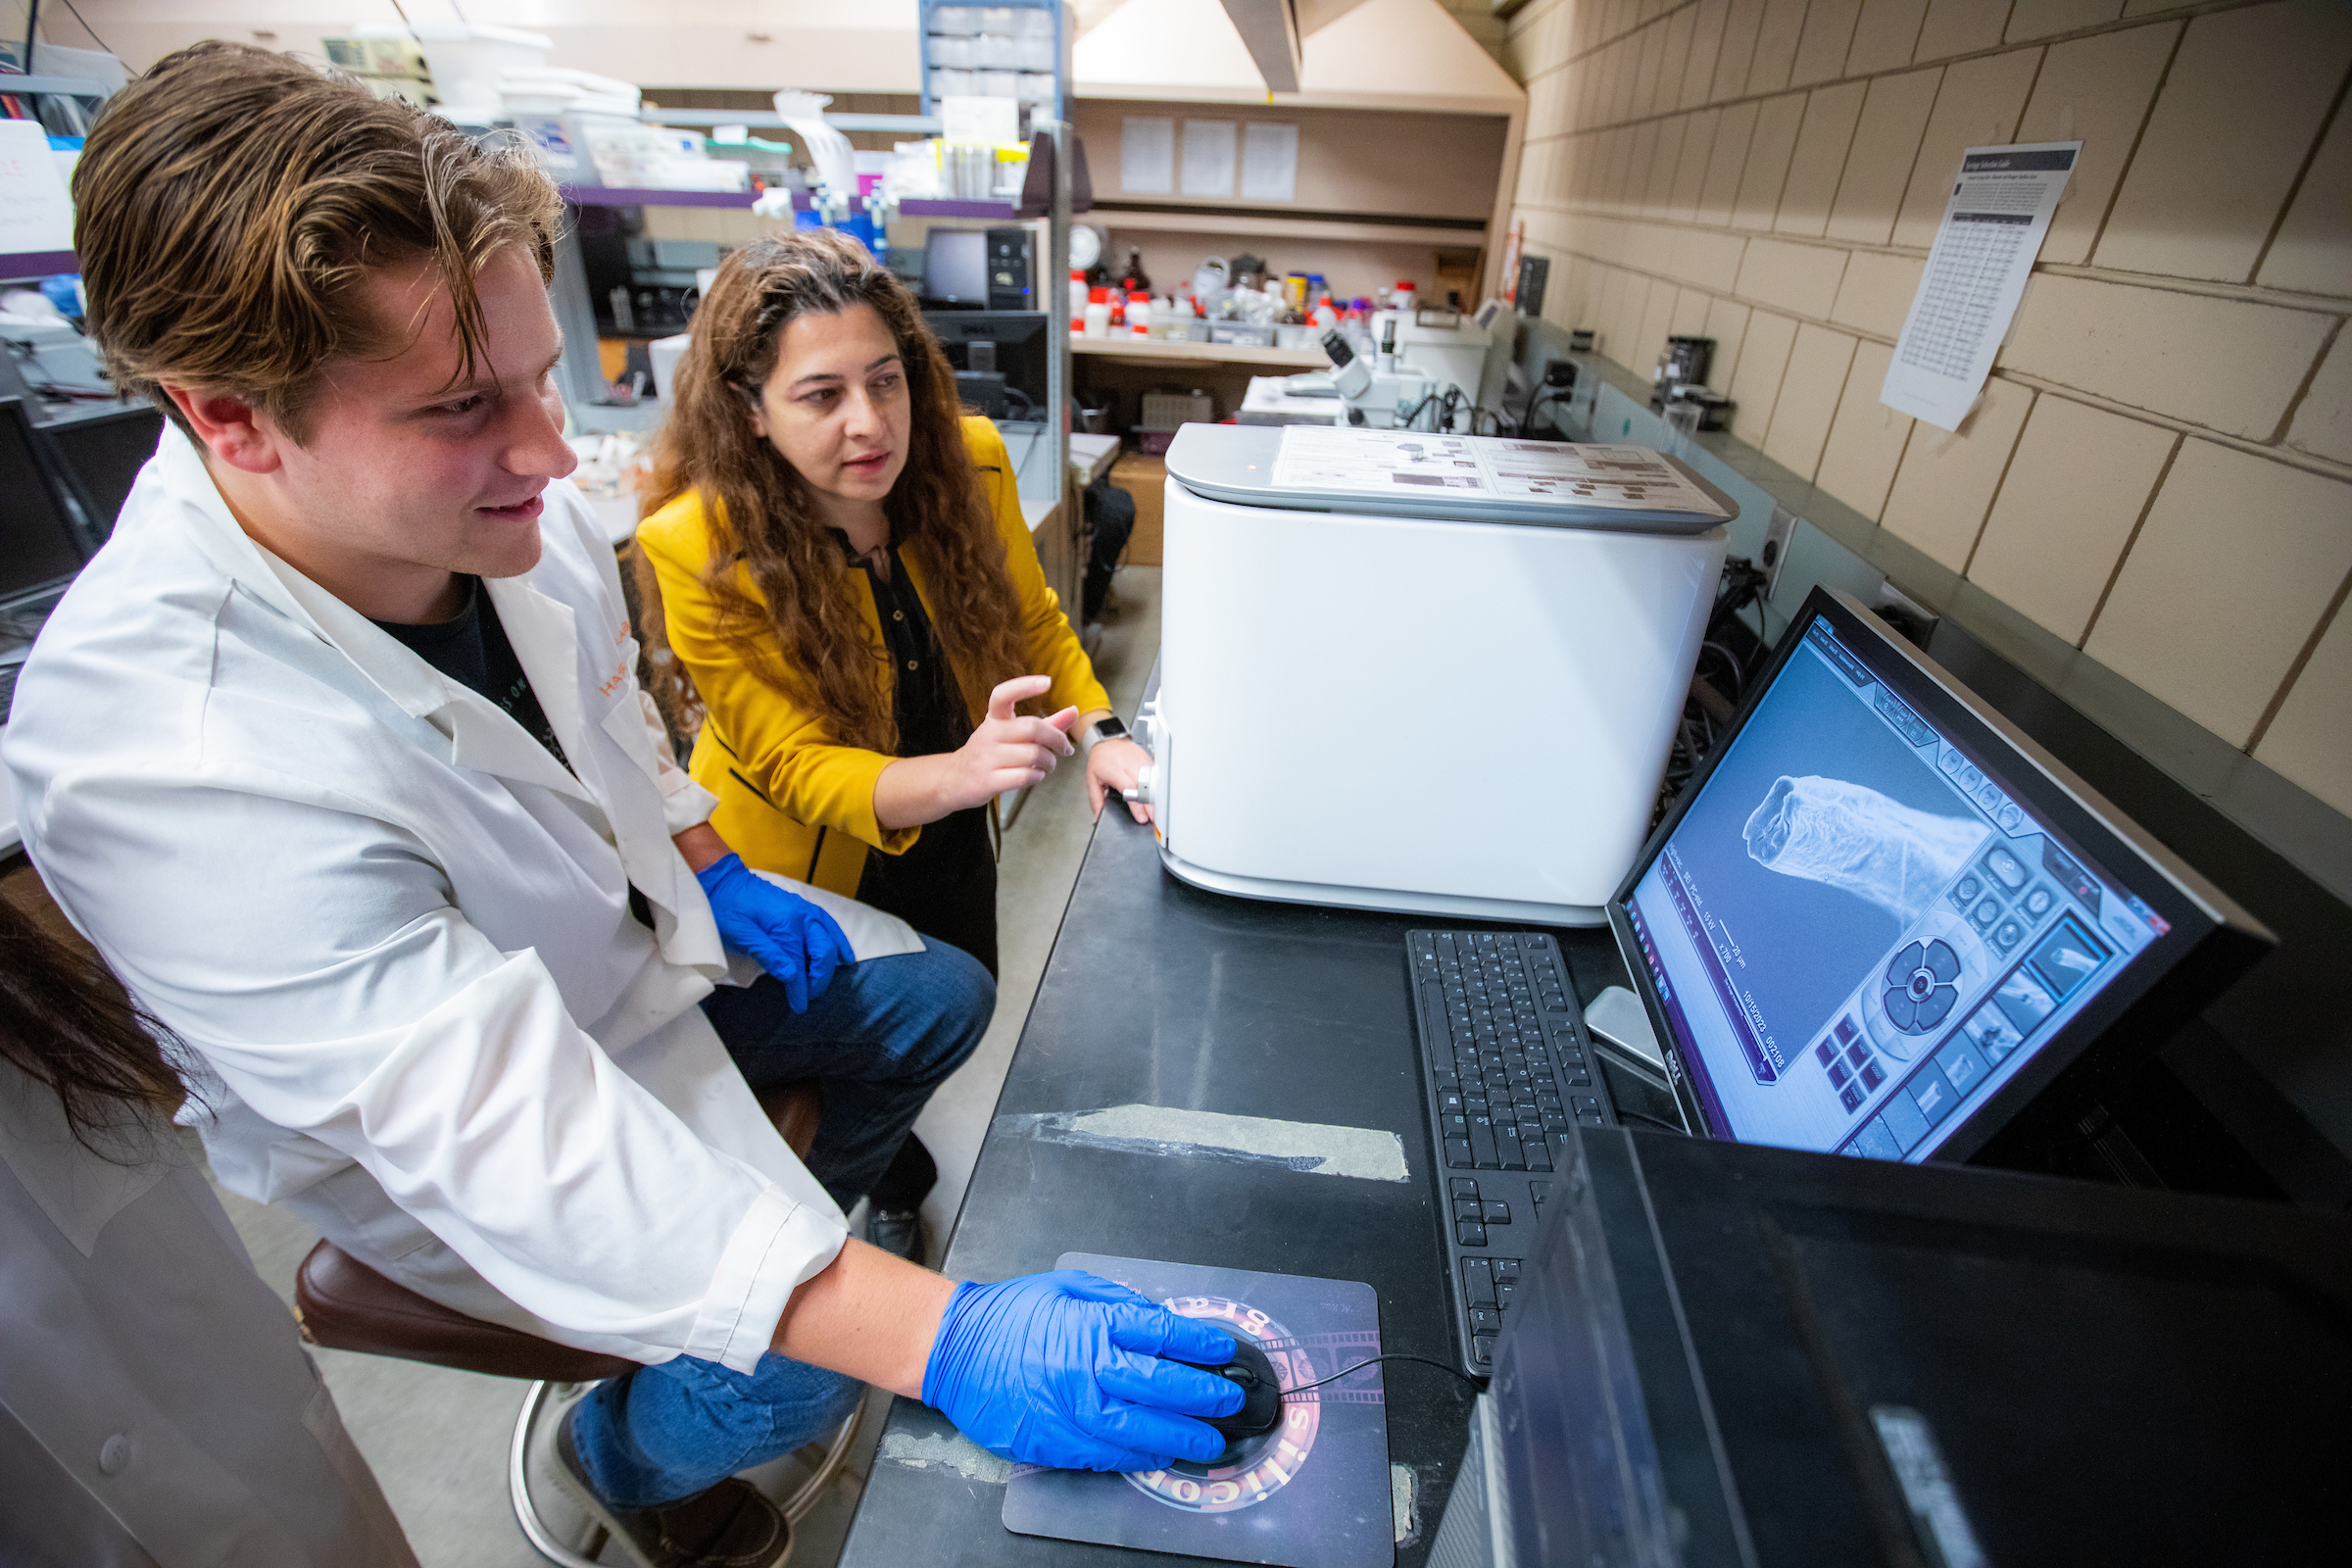 Nicole Hashemi, an associate professor of mechanical engineering, and Justin Sehlin, a graduate student, at work in the research group's laboratory.